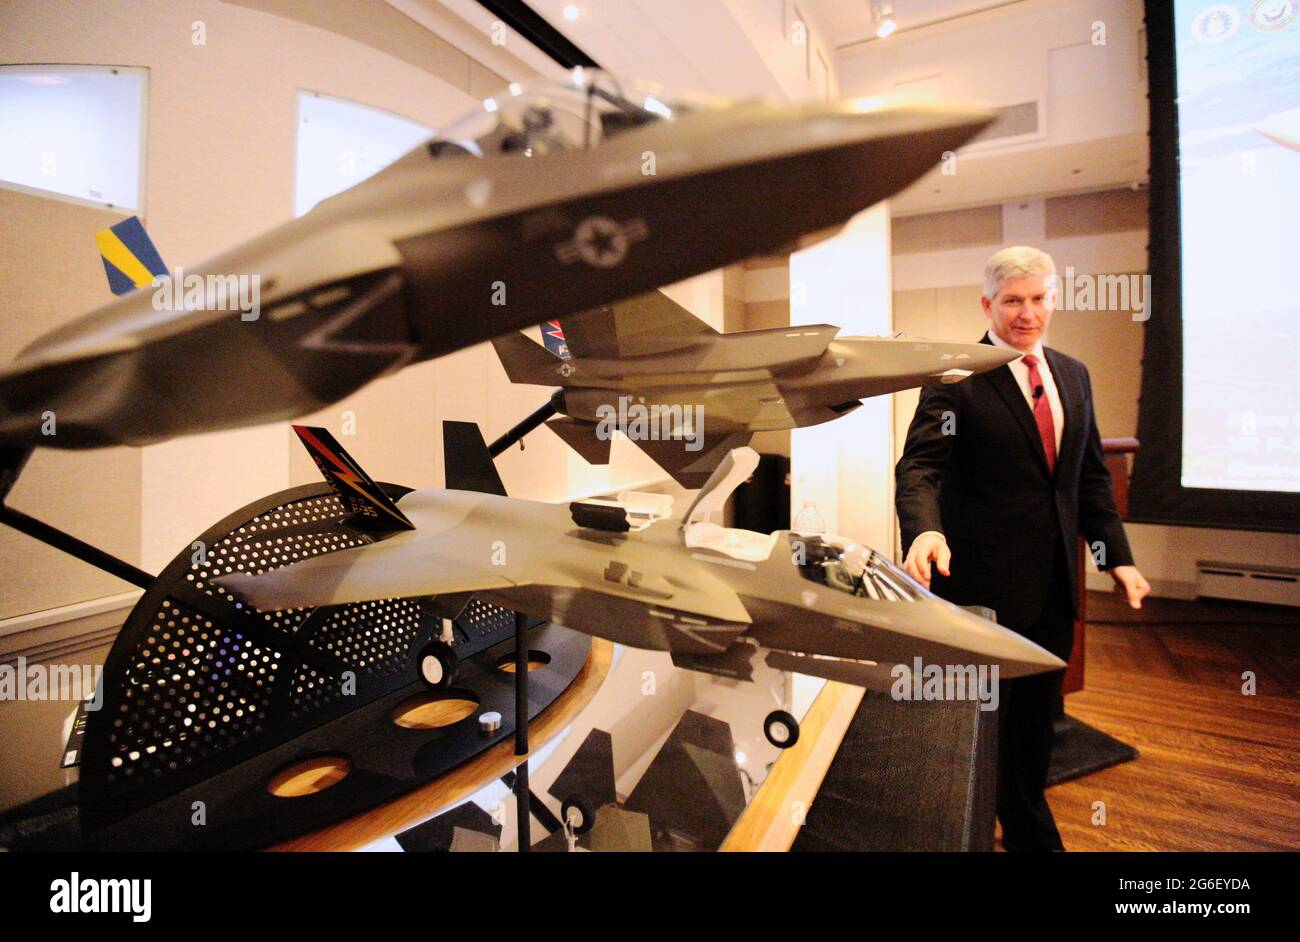 Steve O'Bryan, vice president International Strategy and Business Development at the Lockheed Martin, briefs media on the progress of the Lockheed Martin F35 Lightning program. In 2015, the program was delayed and over budget, with lots of technical issues. Stock Photo